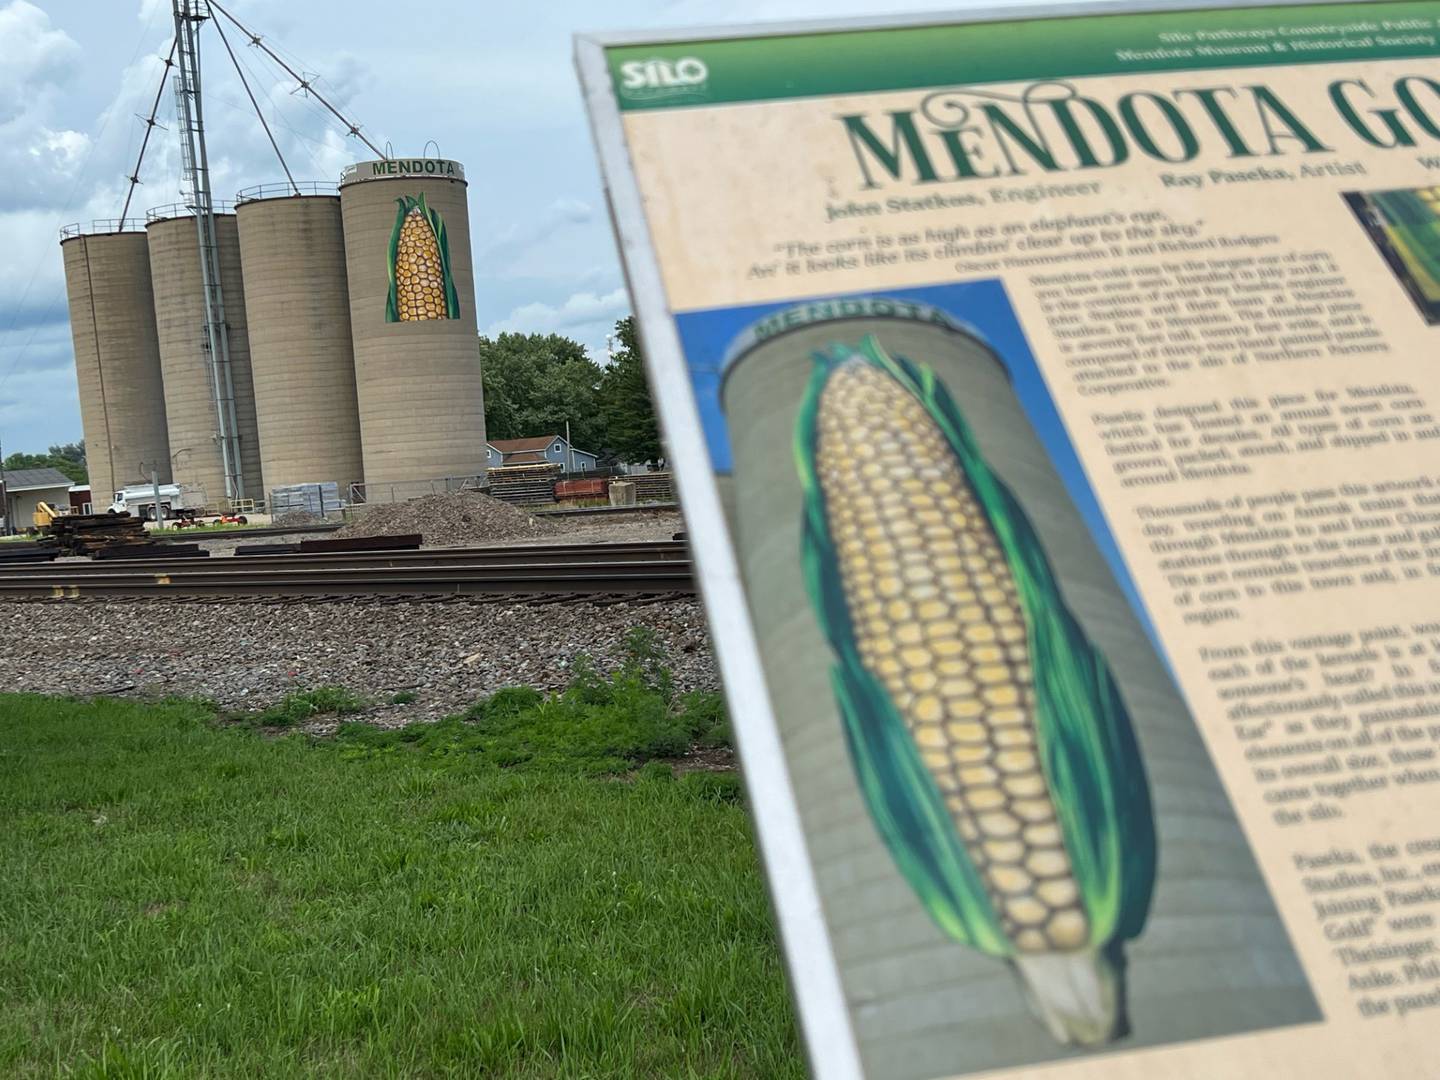 Mendota Gold, the 68-foot-tall ear of corn that was hand painted on metal panels, will be fully removed from its spot on the side of a concrete silo by the railroad tracks. According to NCI ARTworks Executive Director Julia Messina, Northern Partners, owners of the property, have decided to demolish the silo on which it was installed.